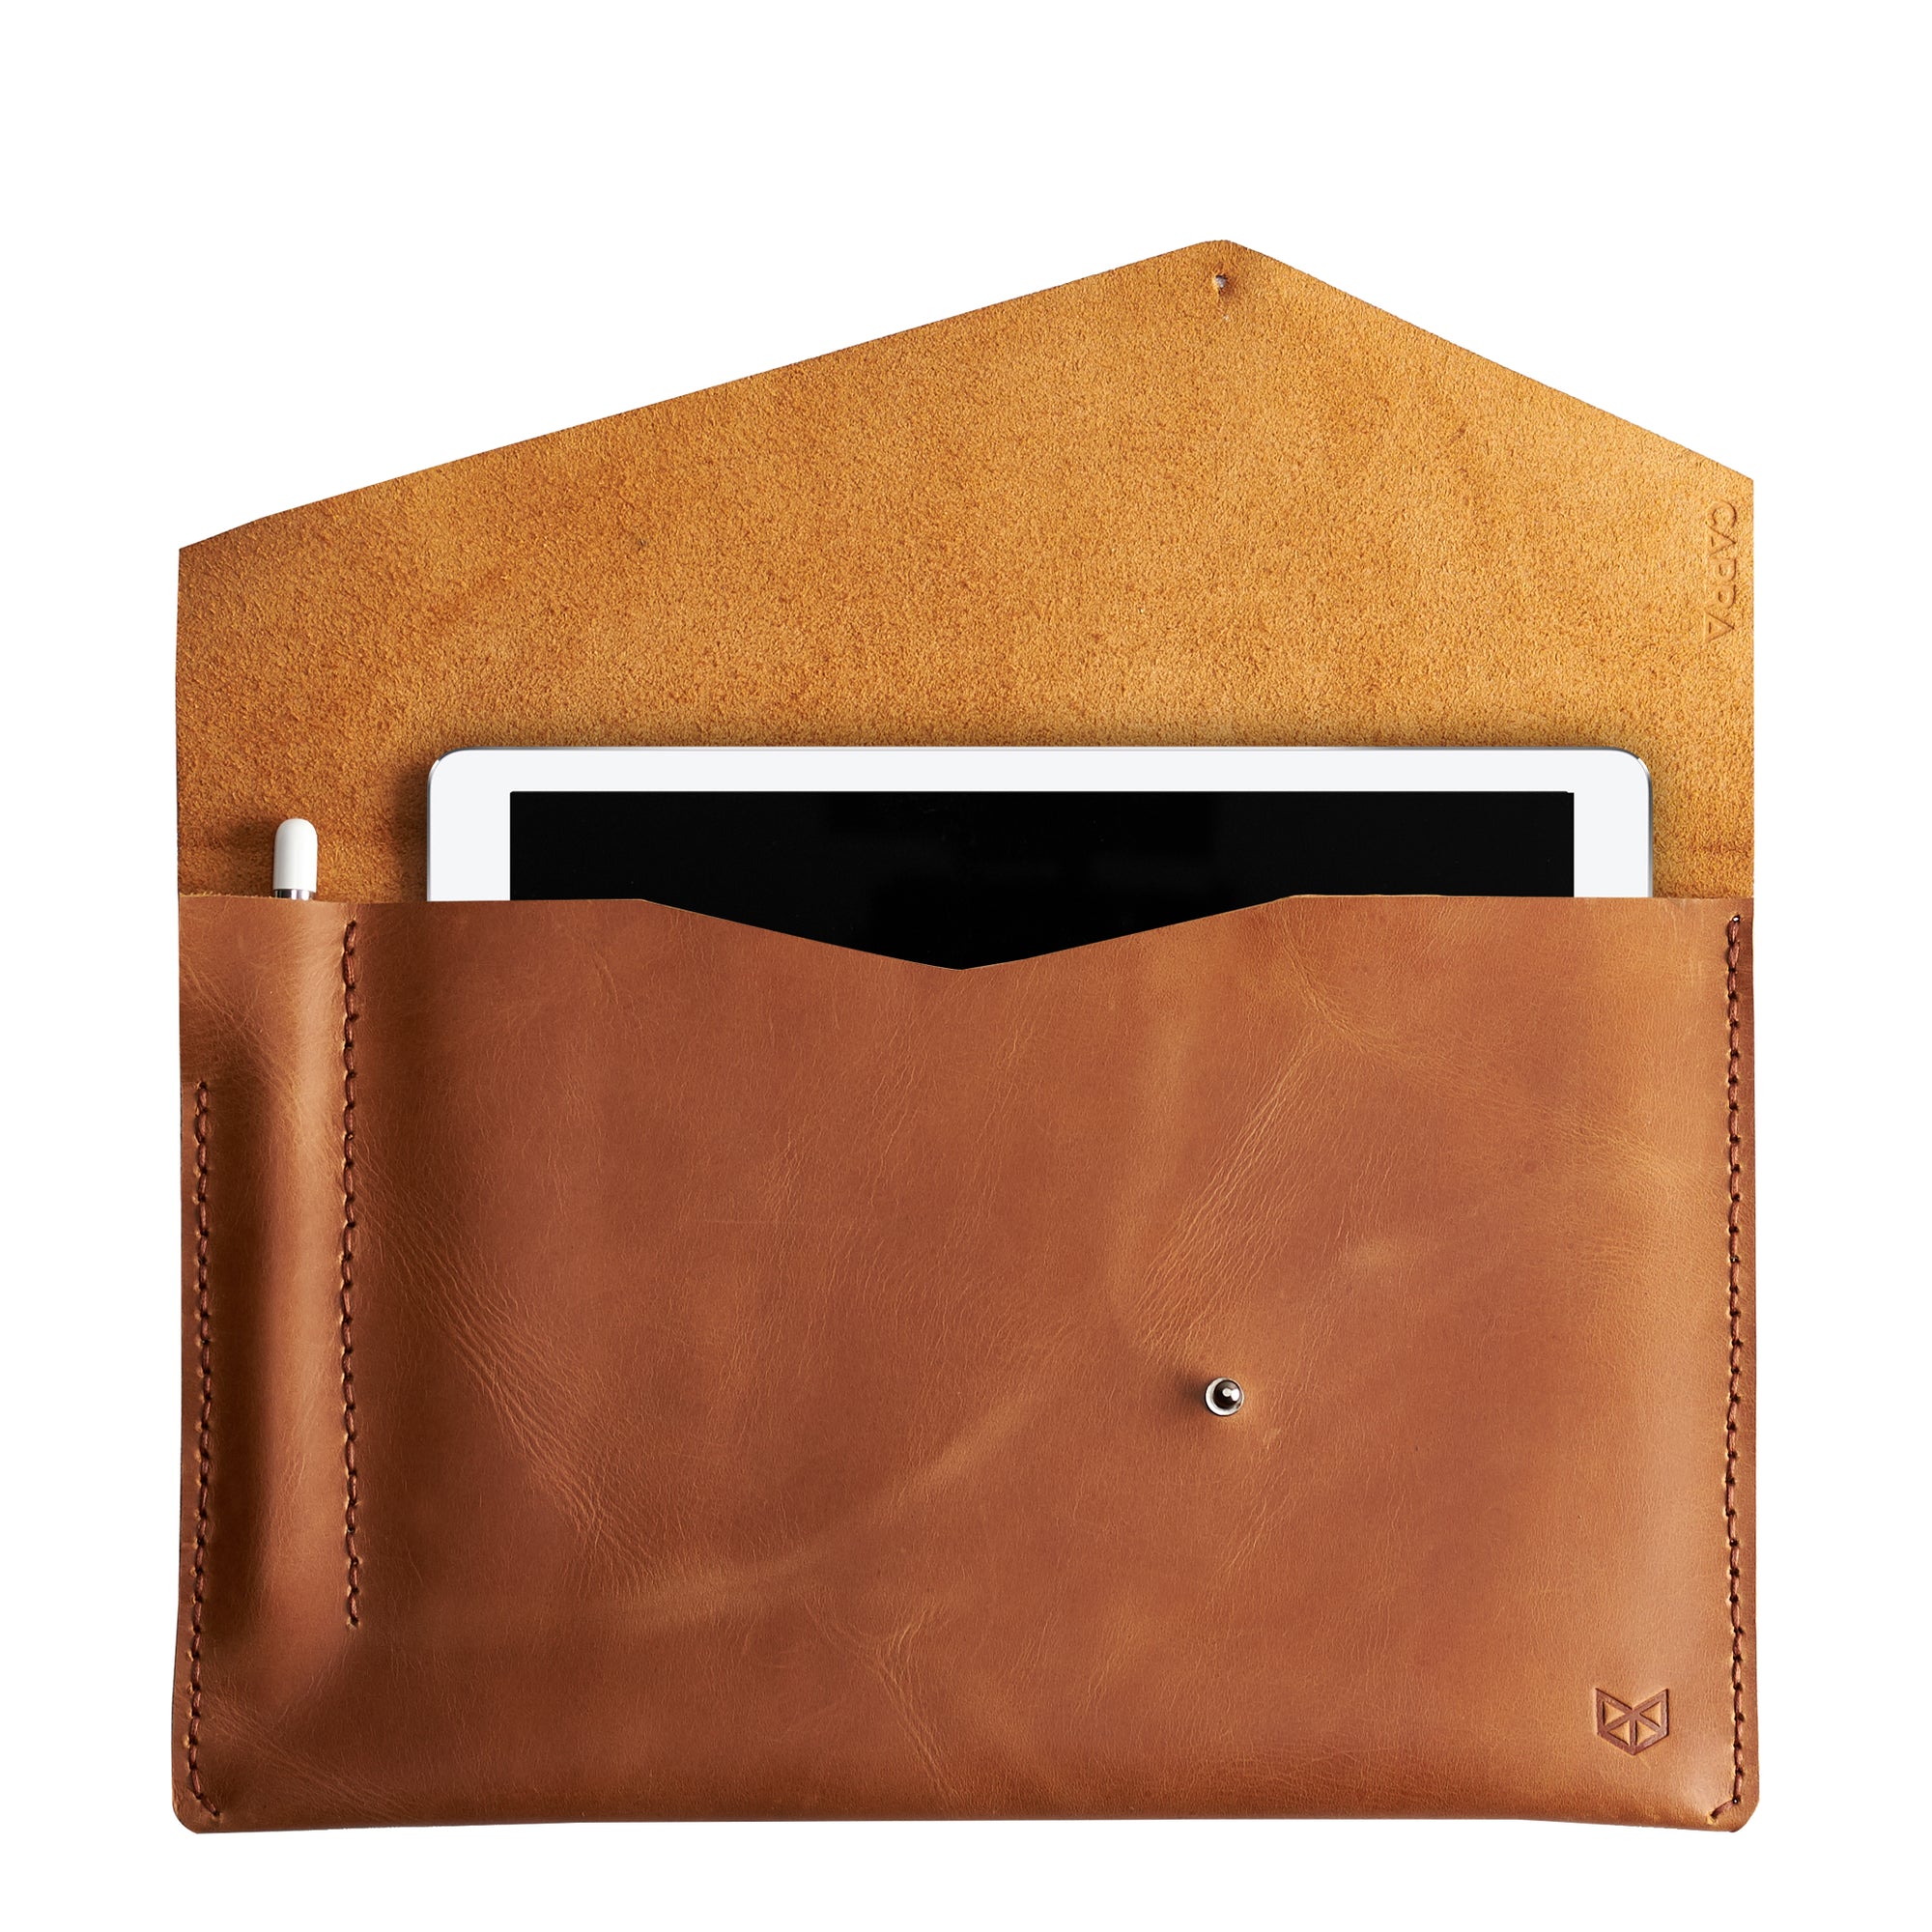 Light brown leather sleeve for ASUS Zenbook Pro Duo. Mens gifts